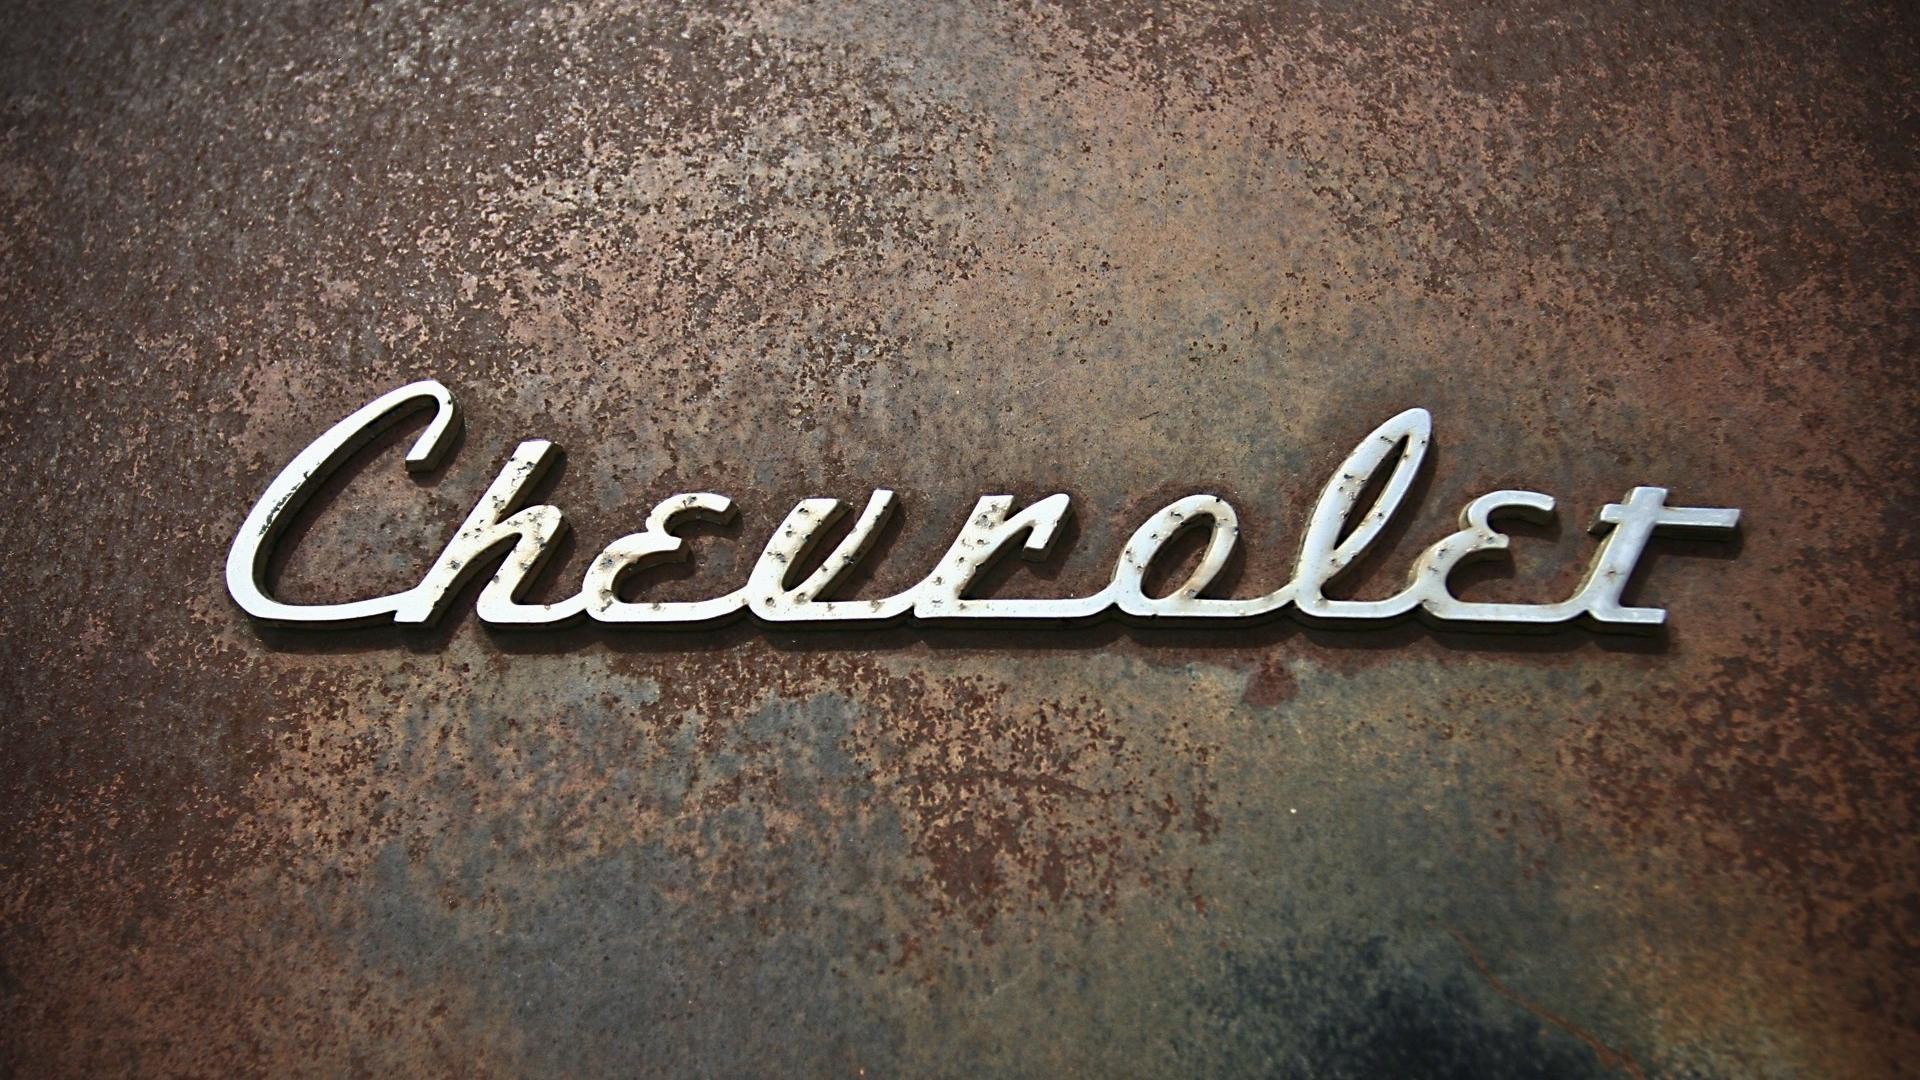 Chevy Logo Wallpaper Hd 60 Images